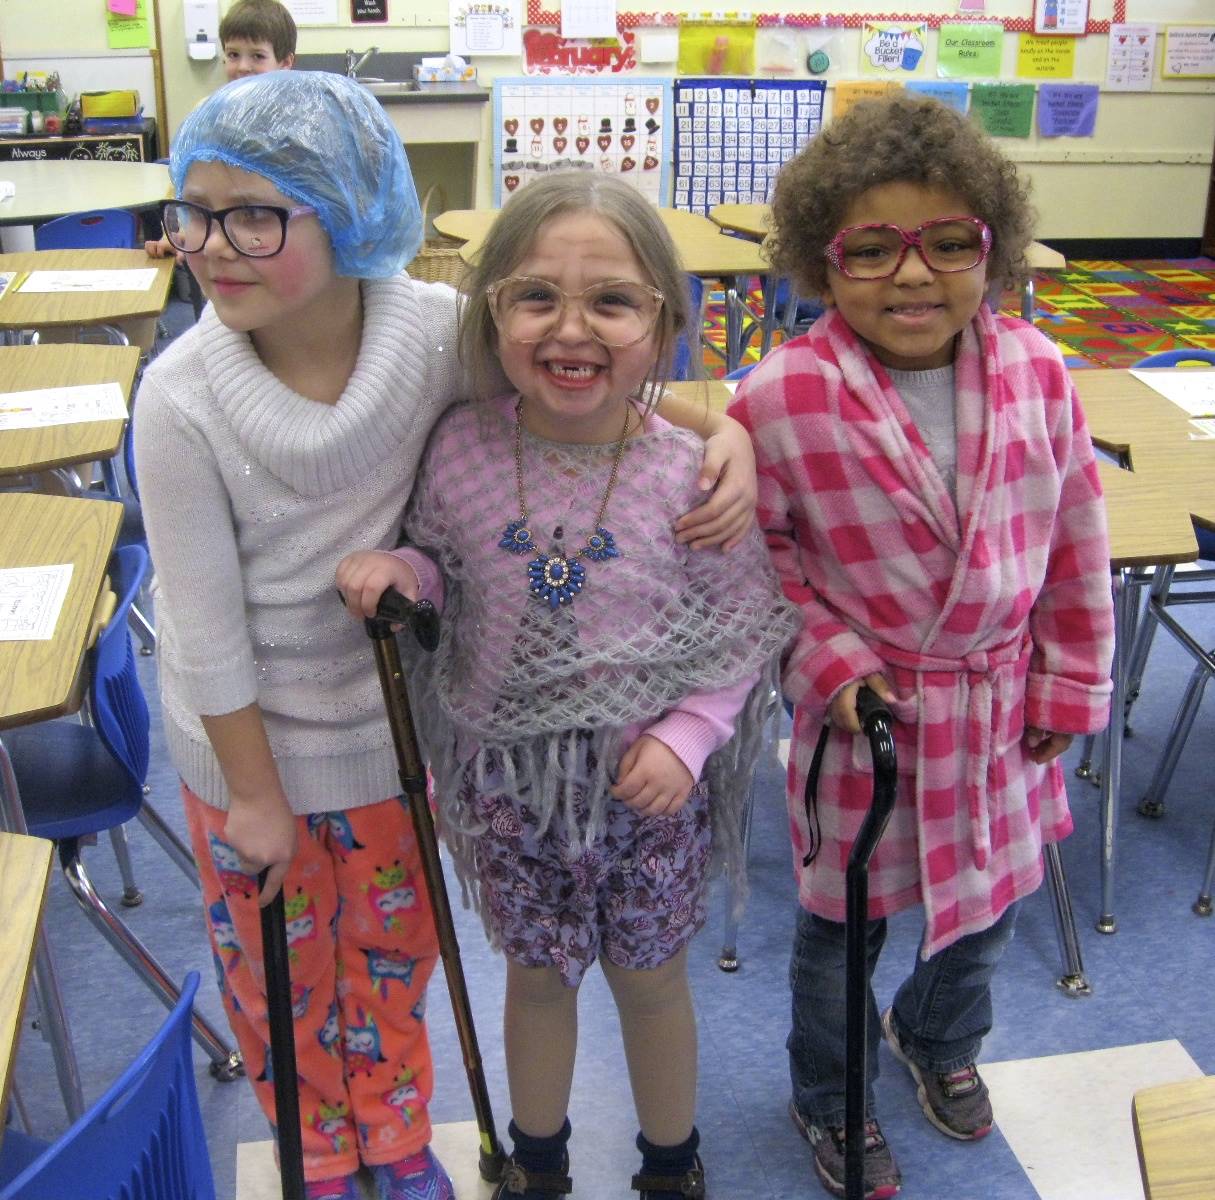 3 students dressed as 100 years old. 